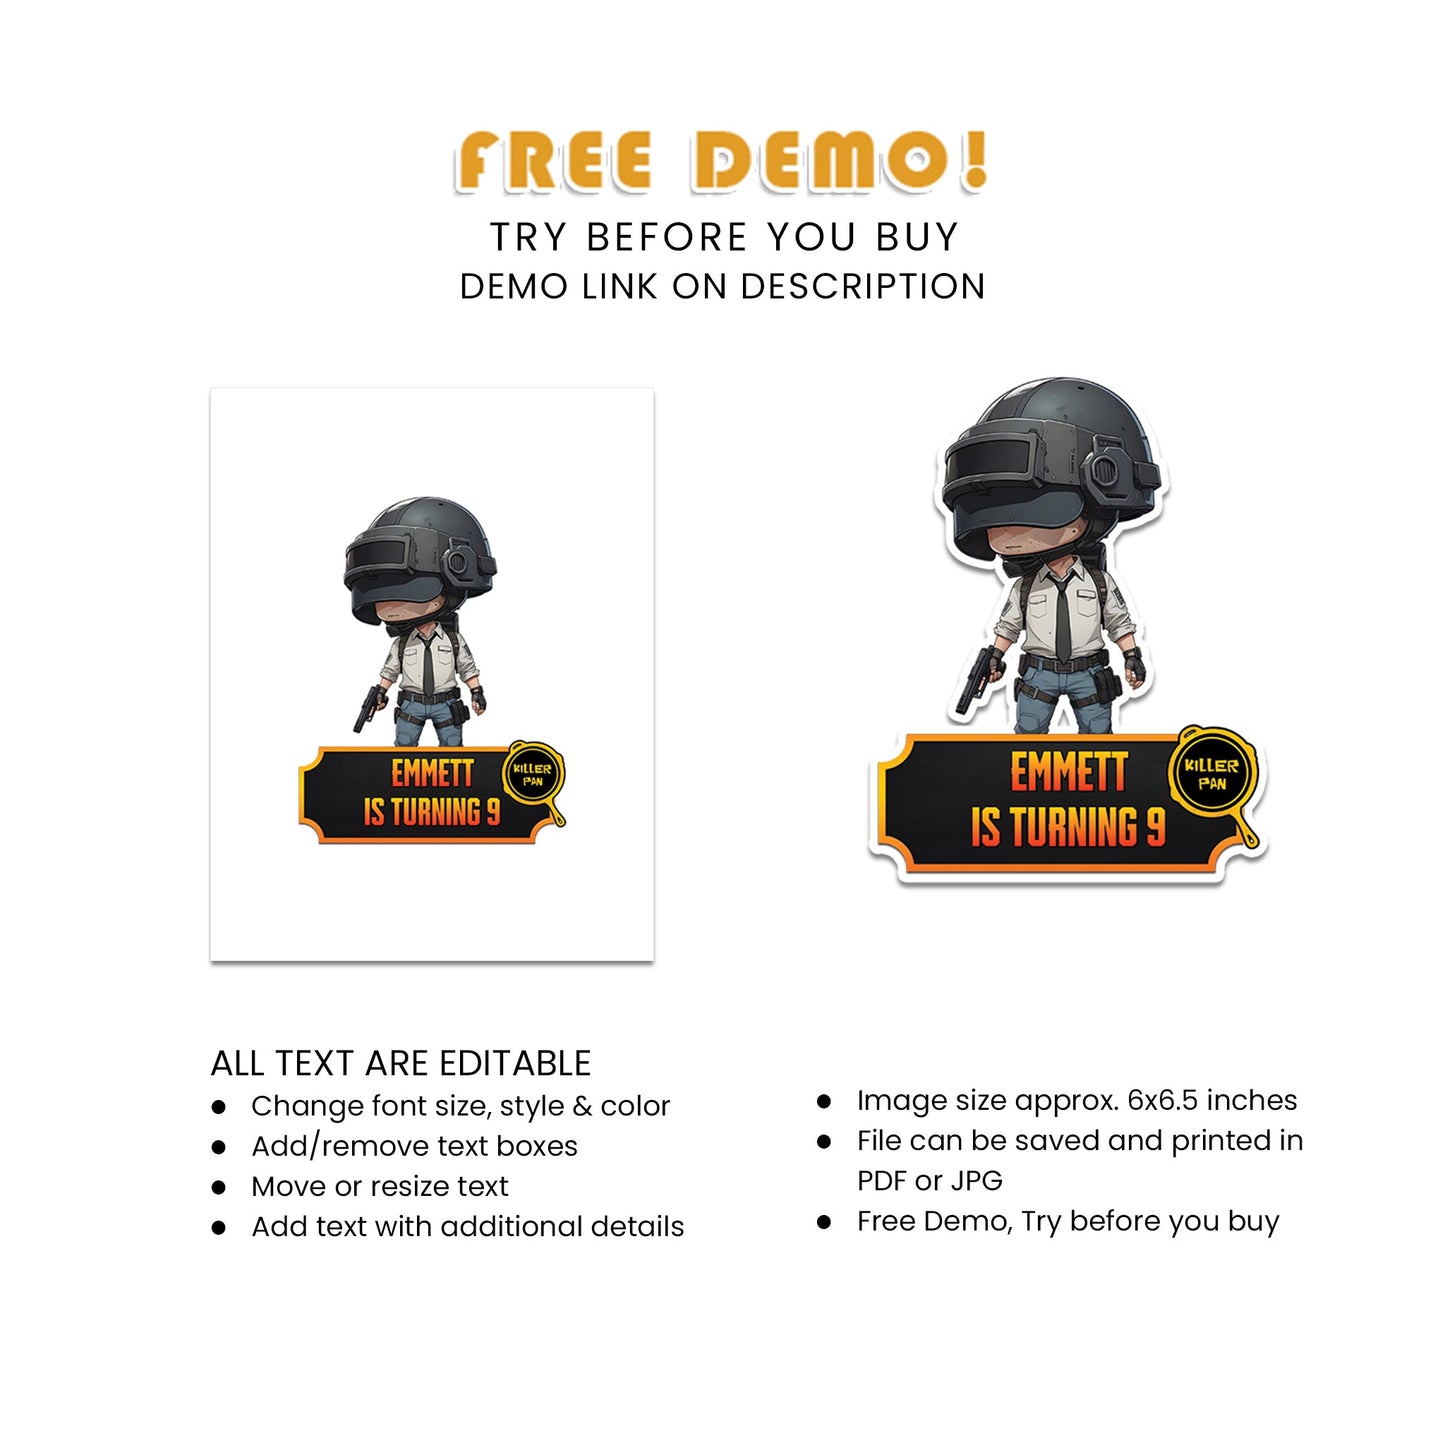 Custom PUBG Cake Toppers for Epic Battle Royale Celebrations - Level Up Your Party Game